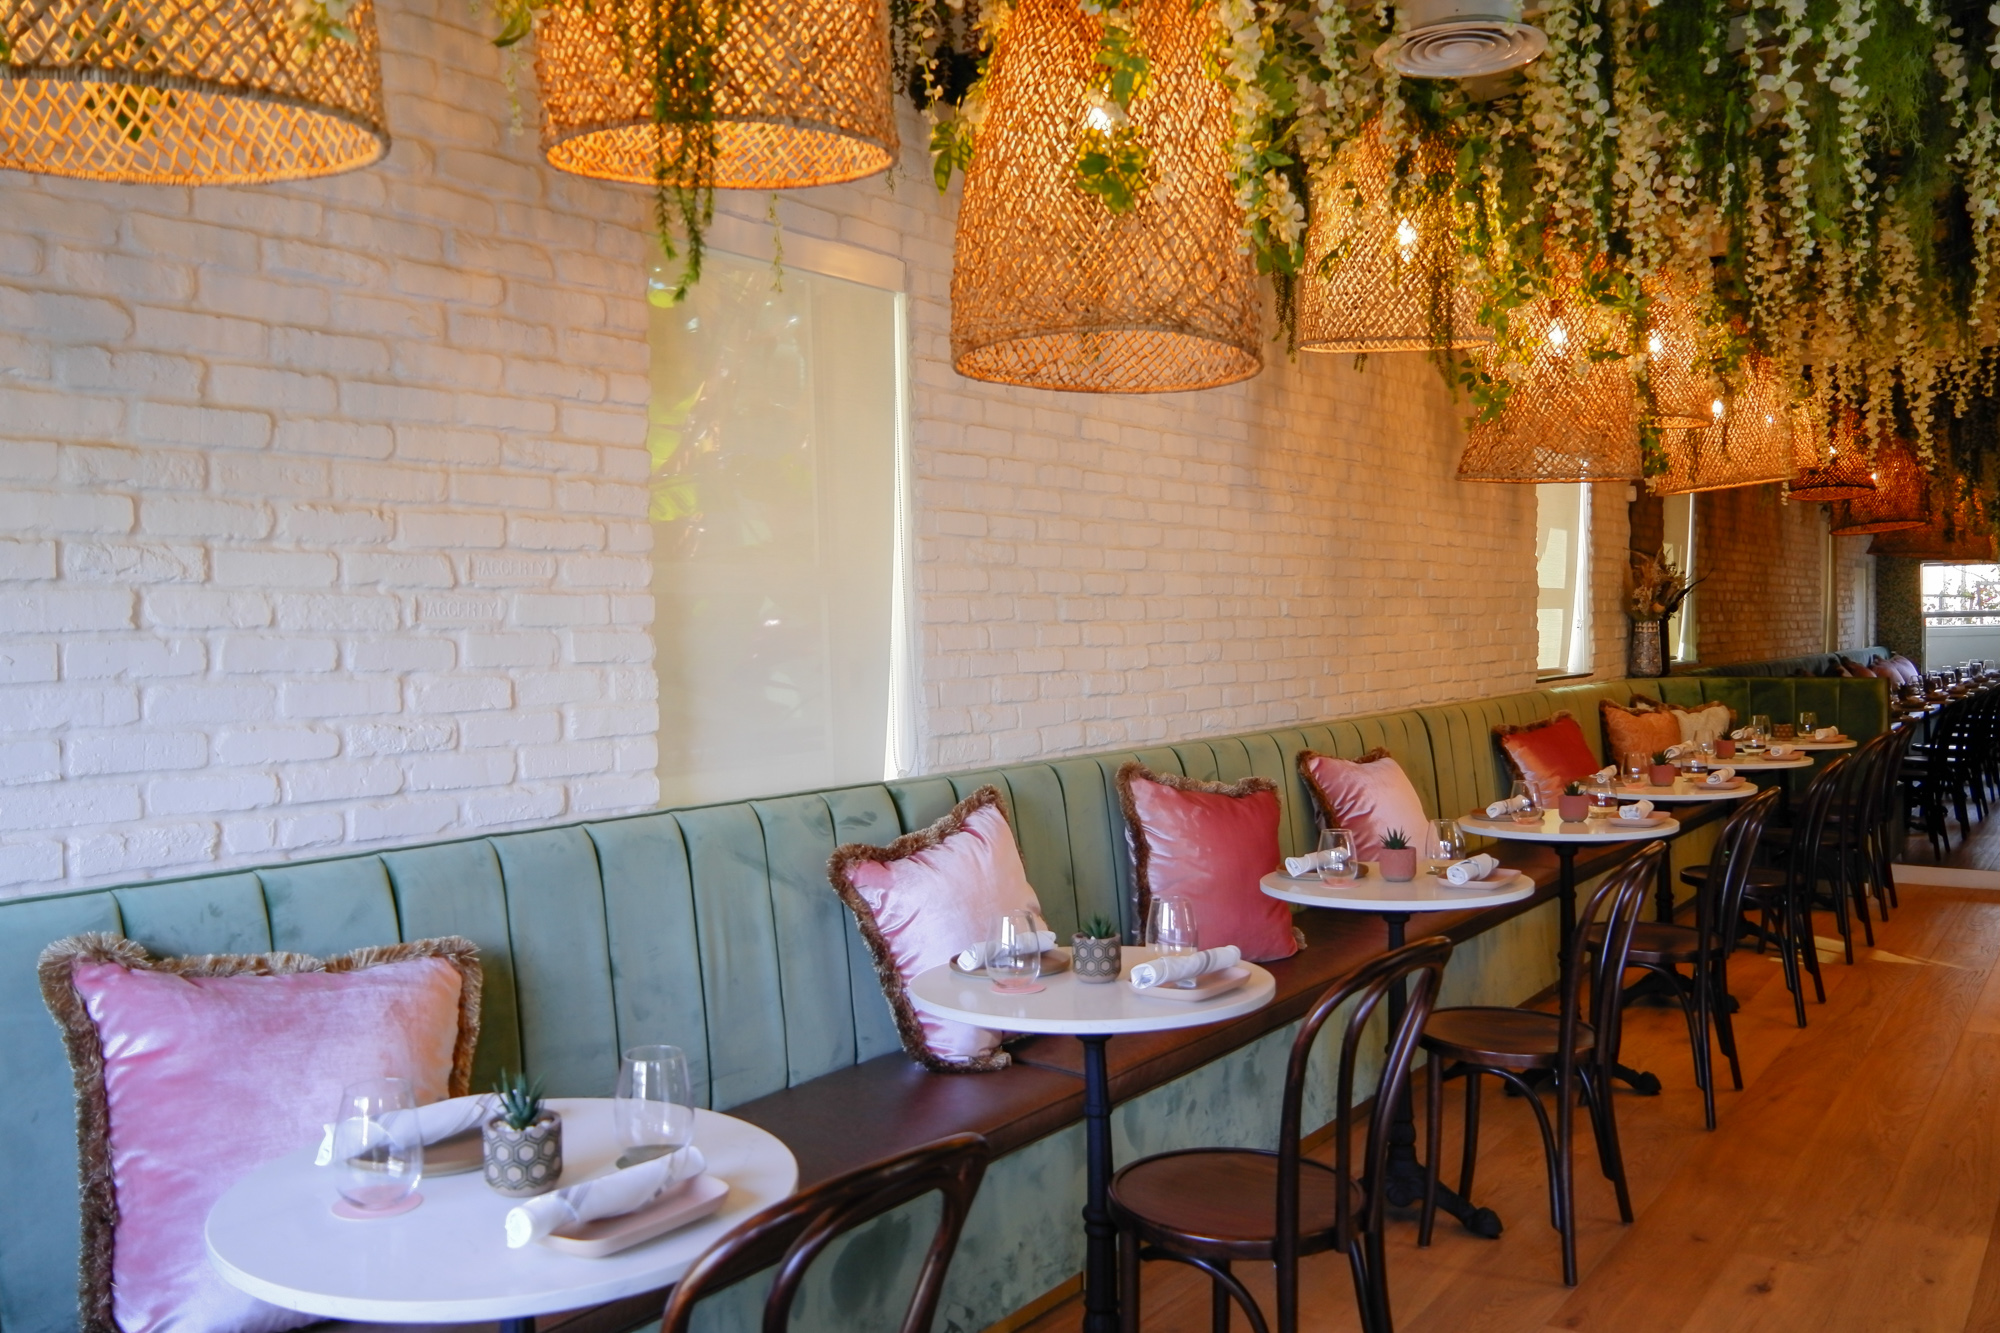 banquettes of green with pink pillows and hanging lamps